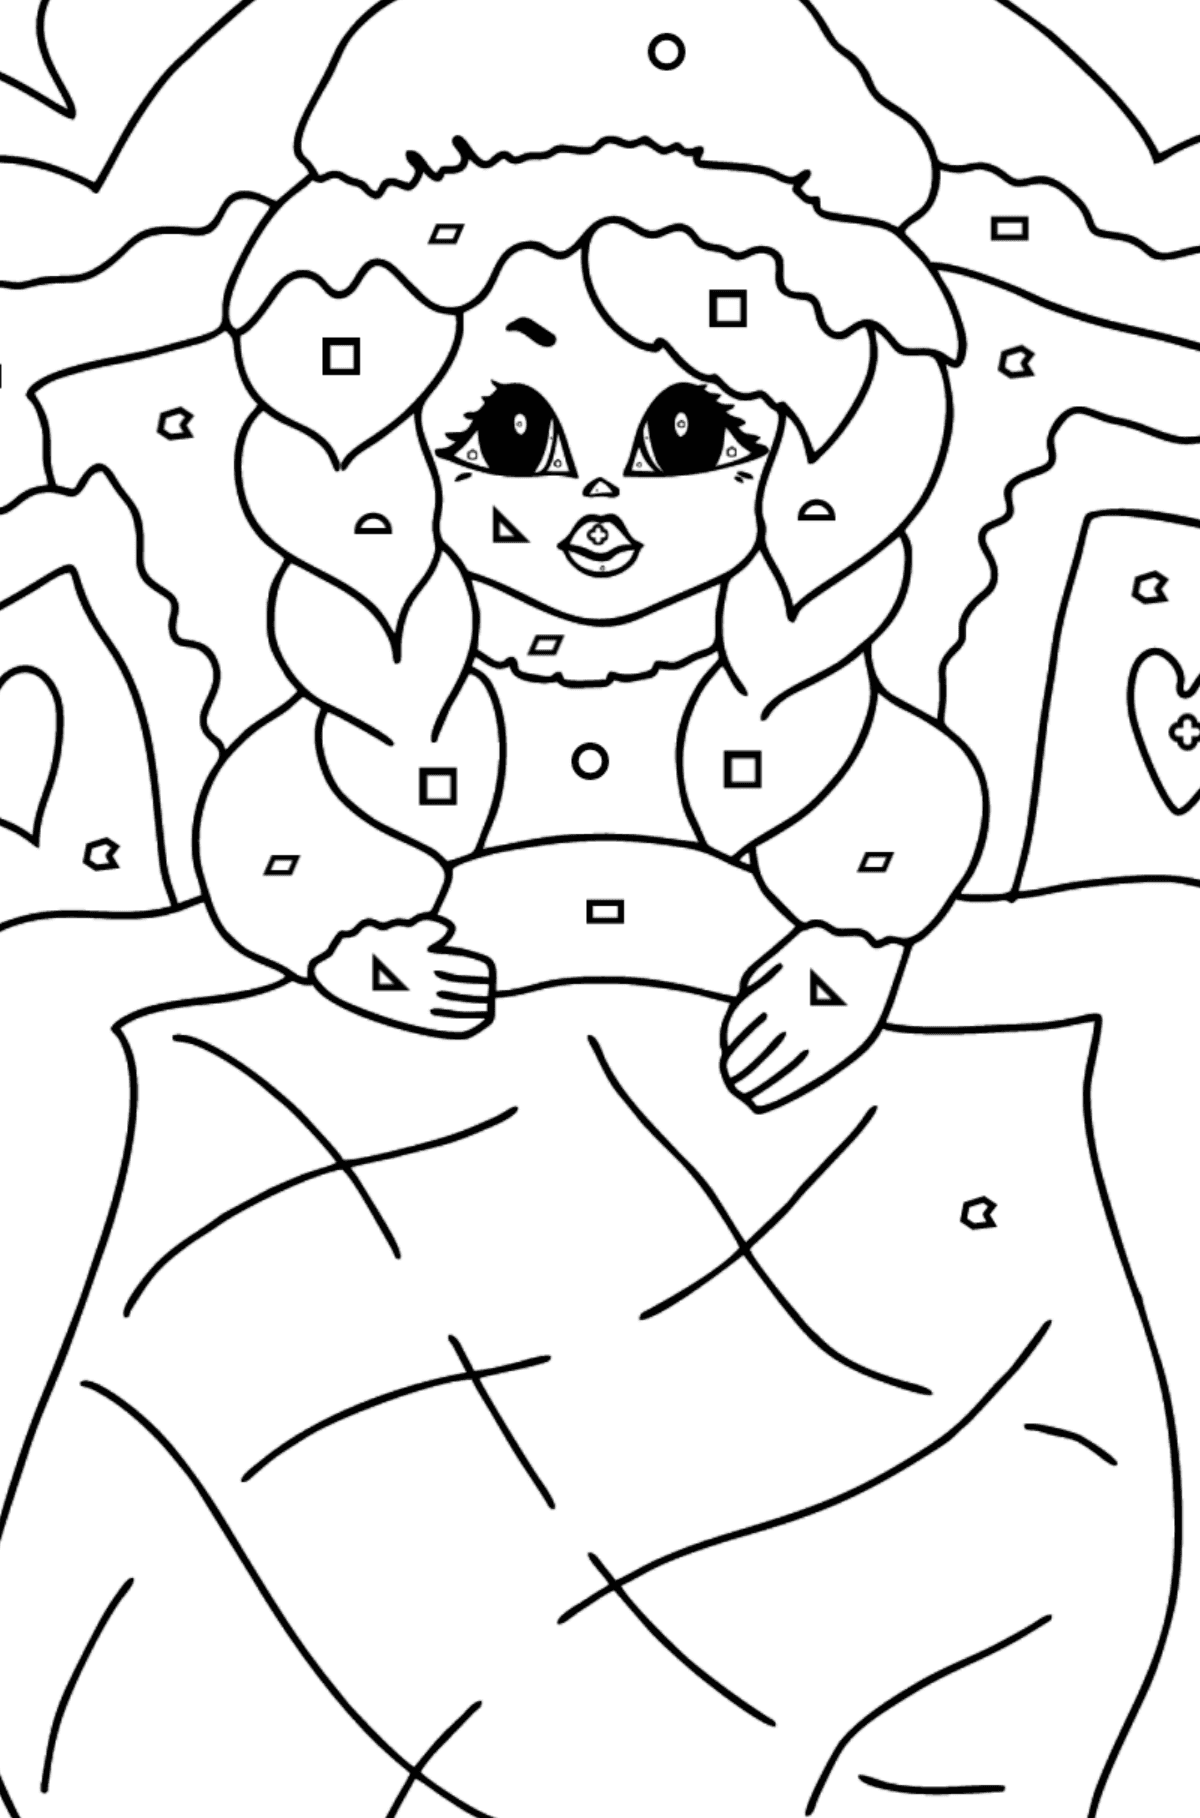 Coloring Page - A Princess in a Bed - for Girls - Coloring by Geometric Shapes for Kids